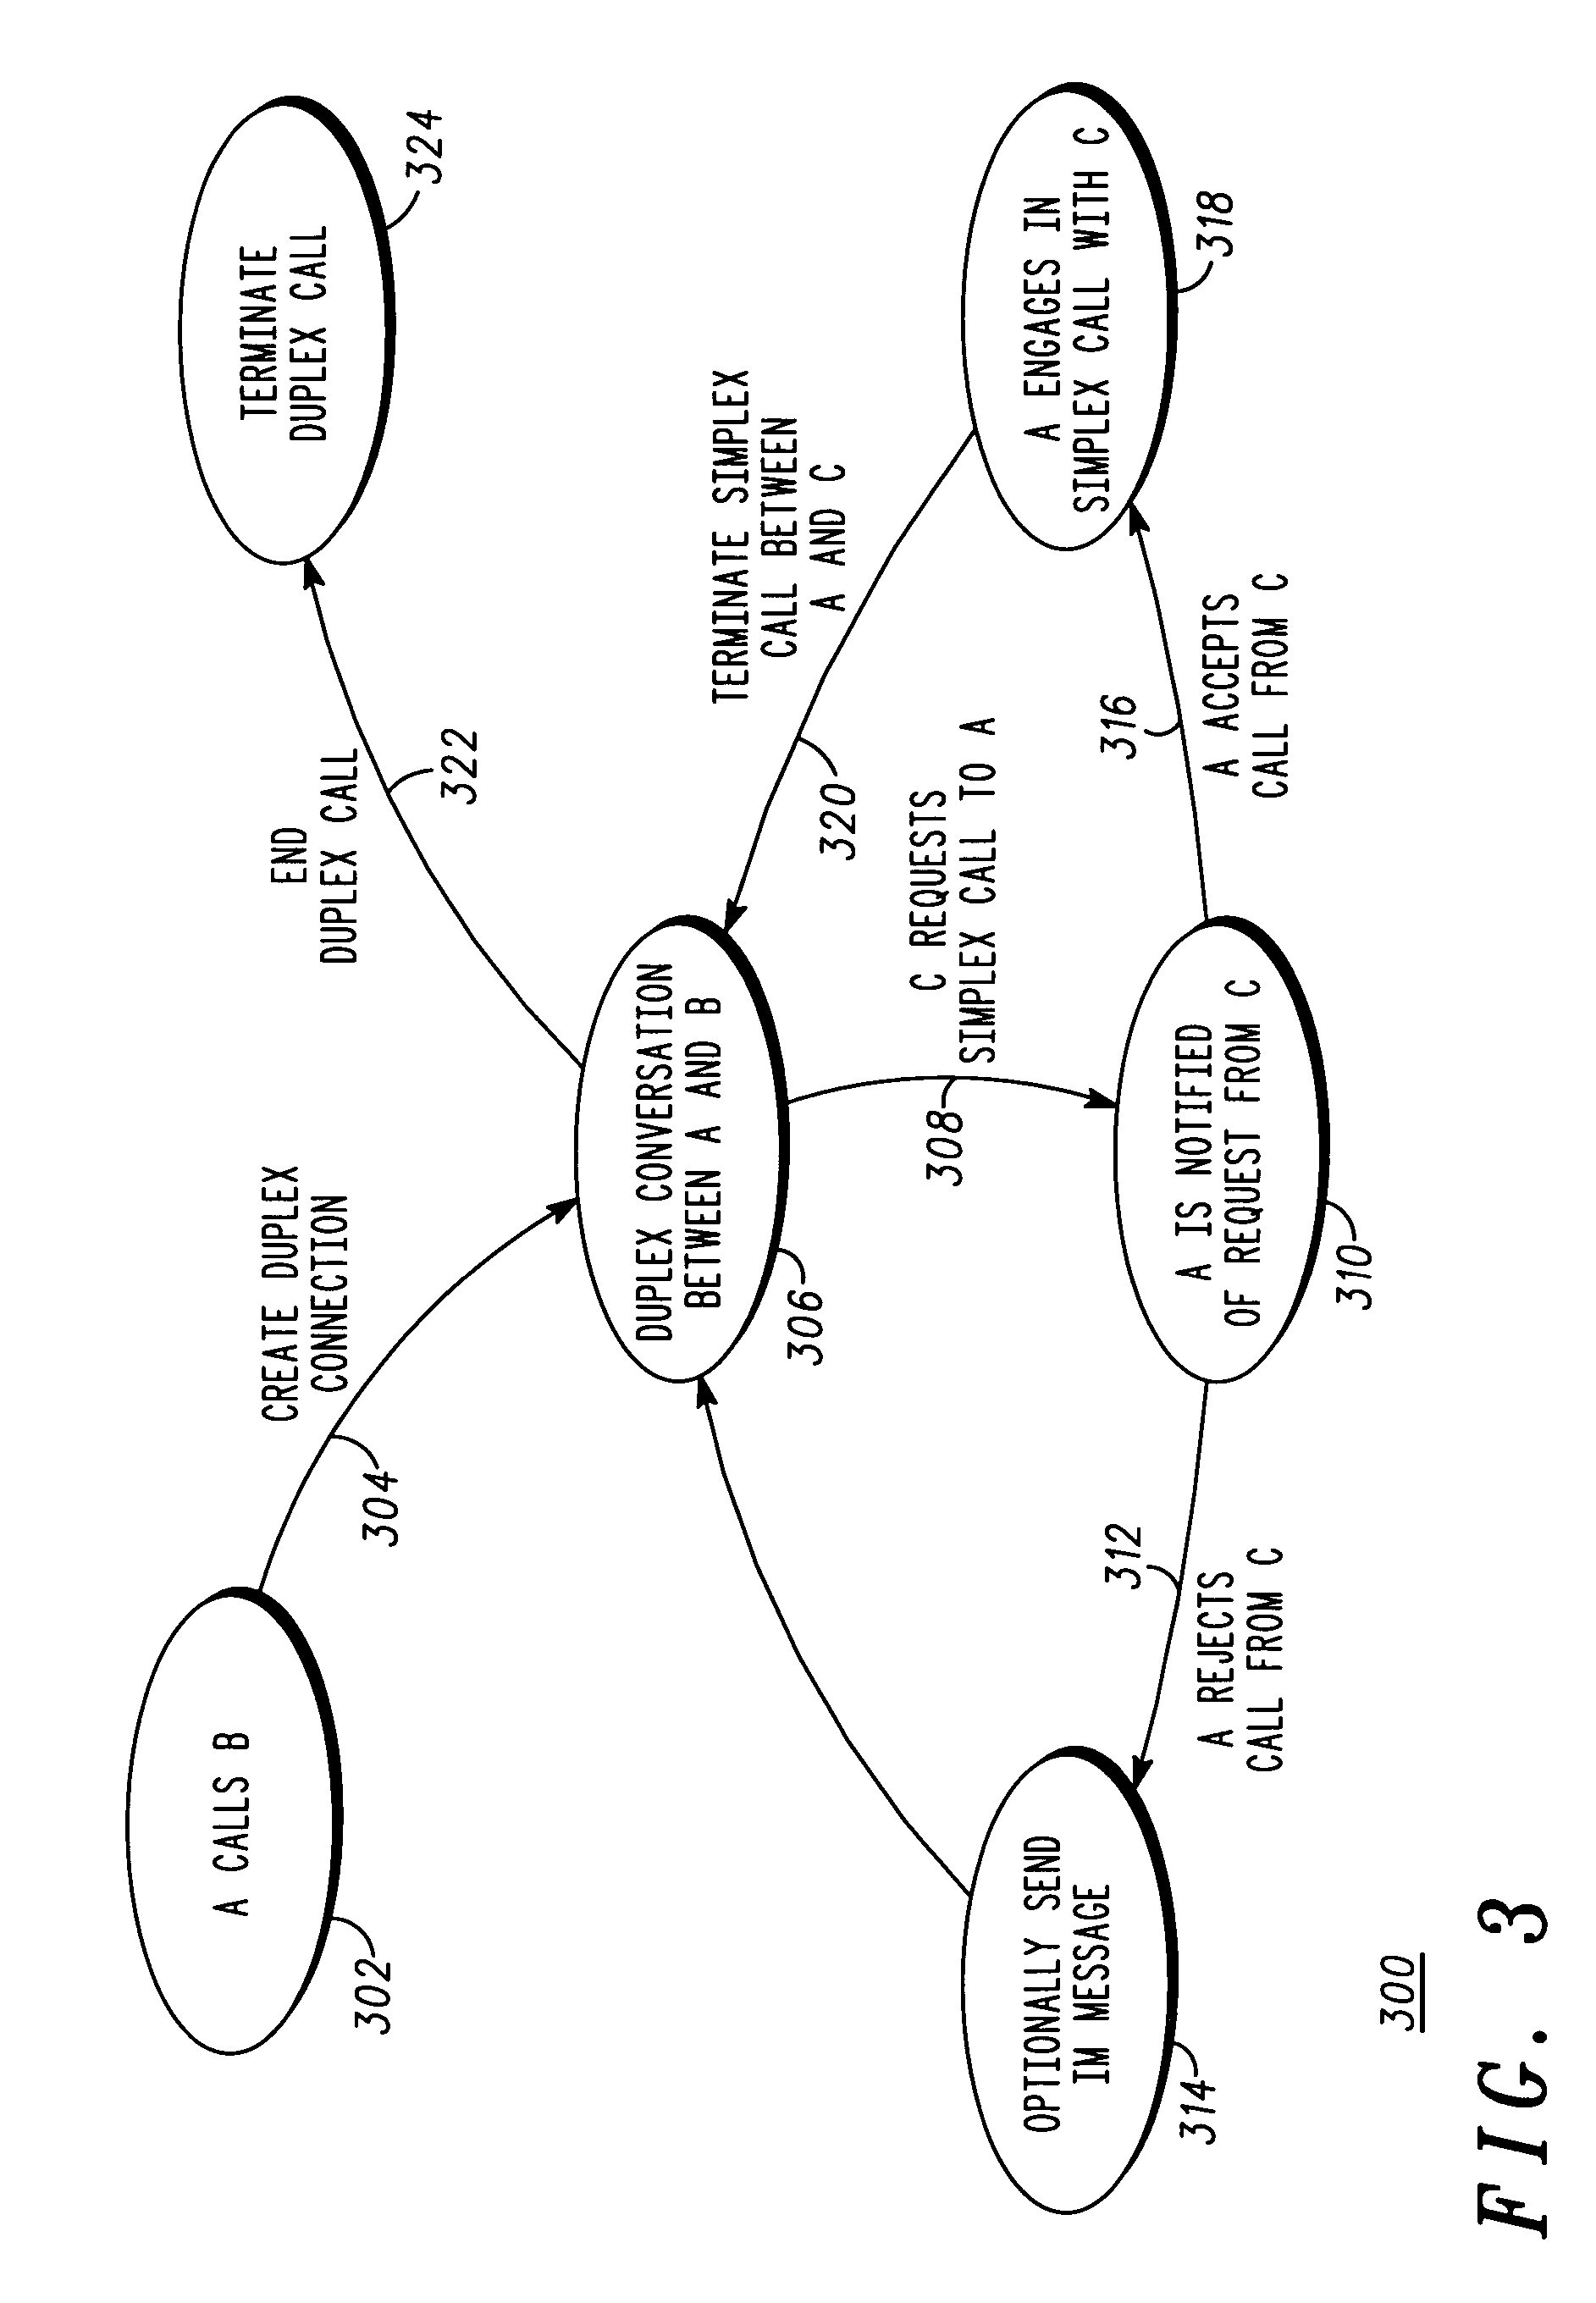 Mode shifting communications system and method